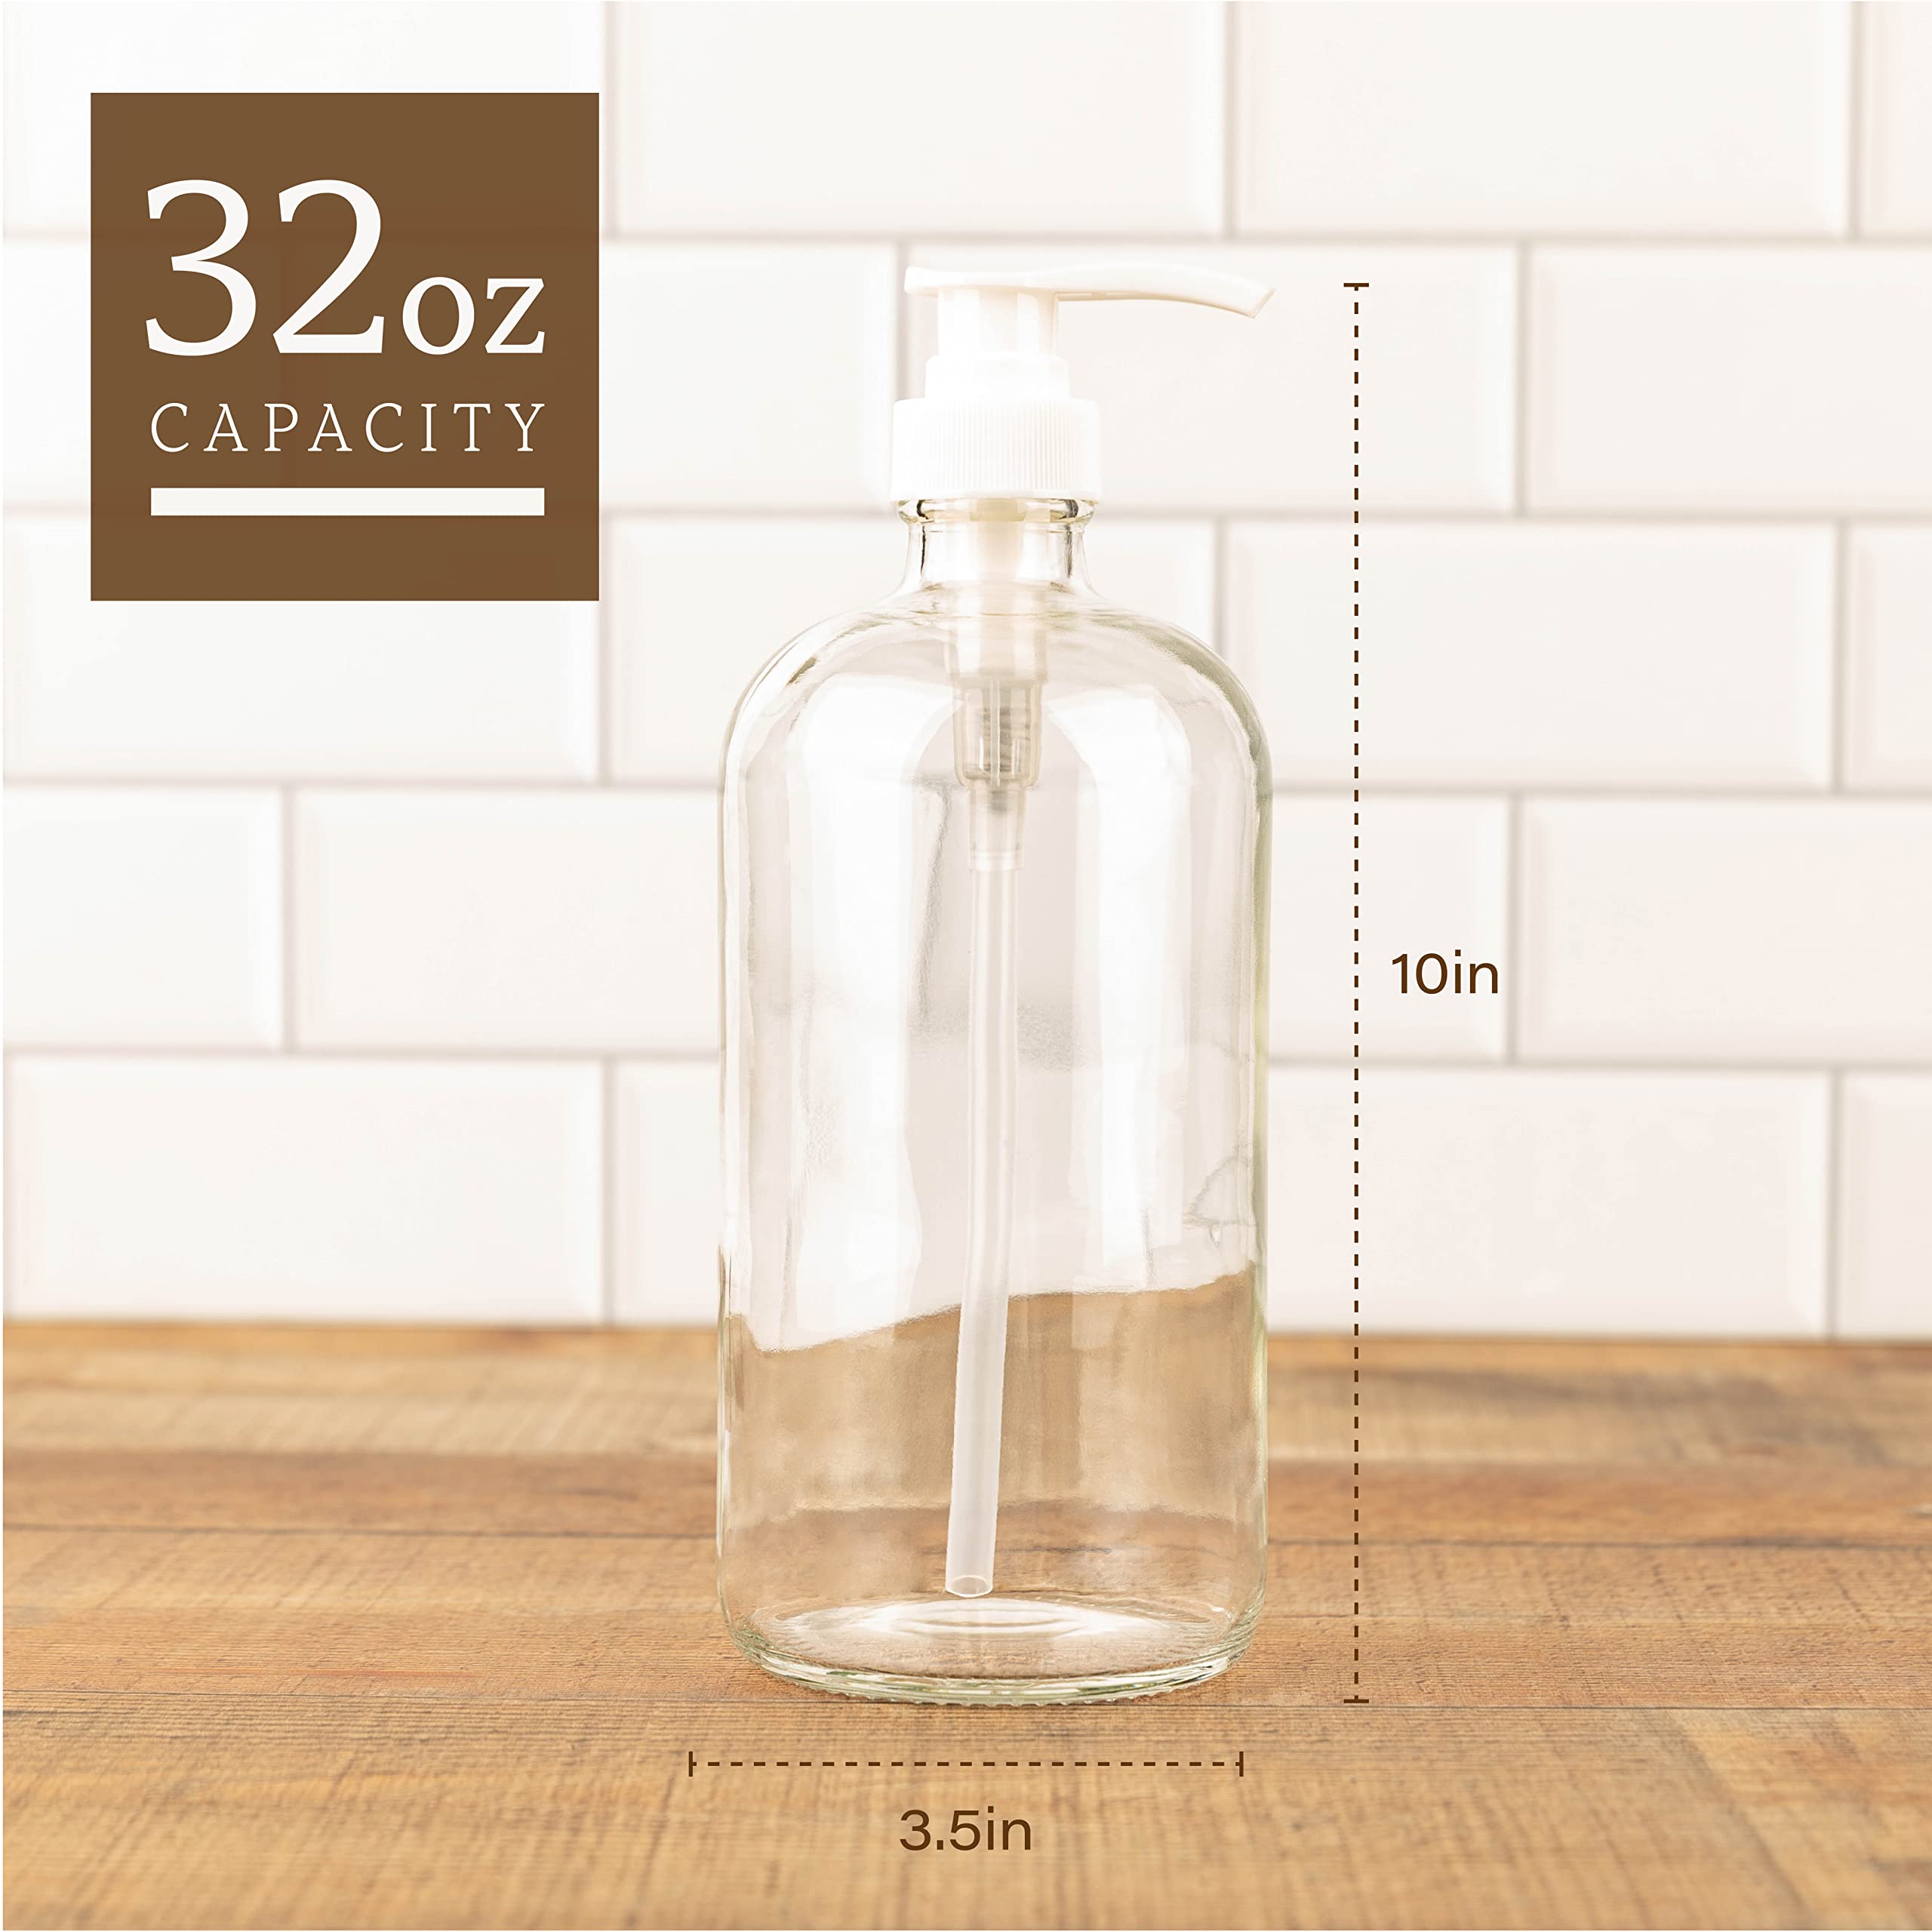 kitchentoolz 32-Ounce Large Clear Glass Boston Round Bottles w/Pumps. Great for Lotions, Soaps,Oils, Sauces - Food Safe and Medical Grade  - Like New